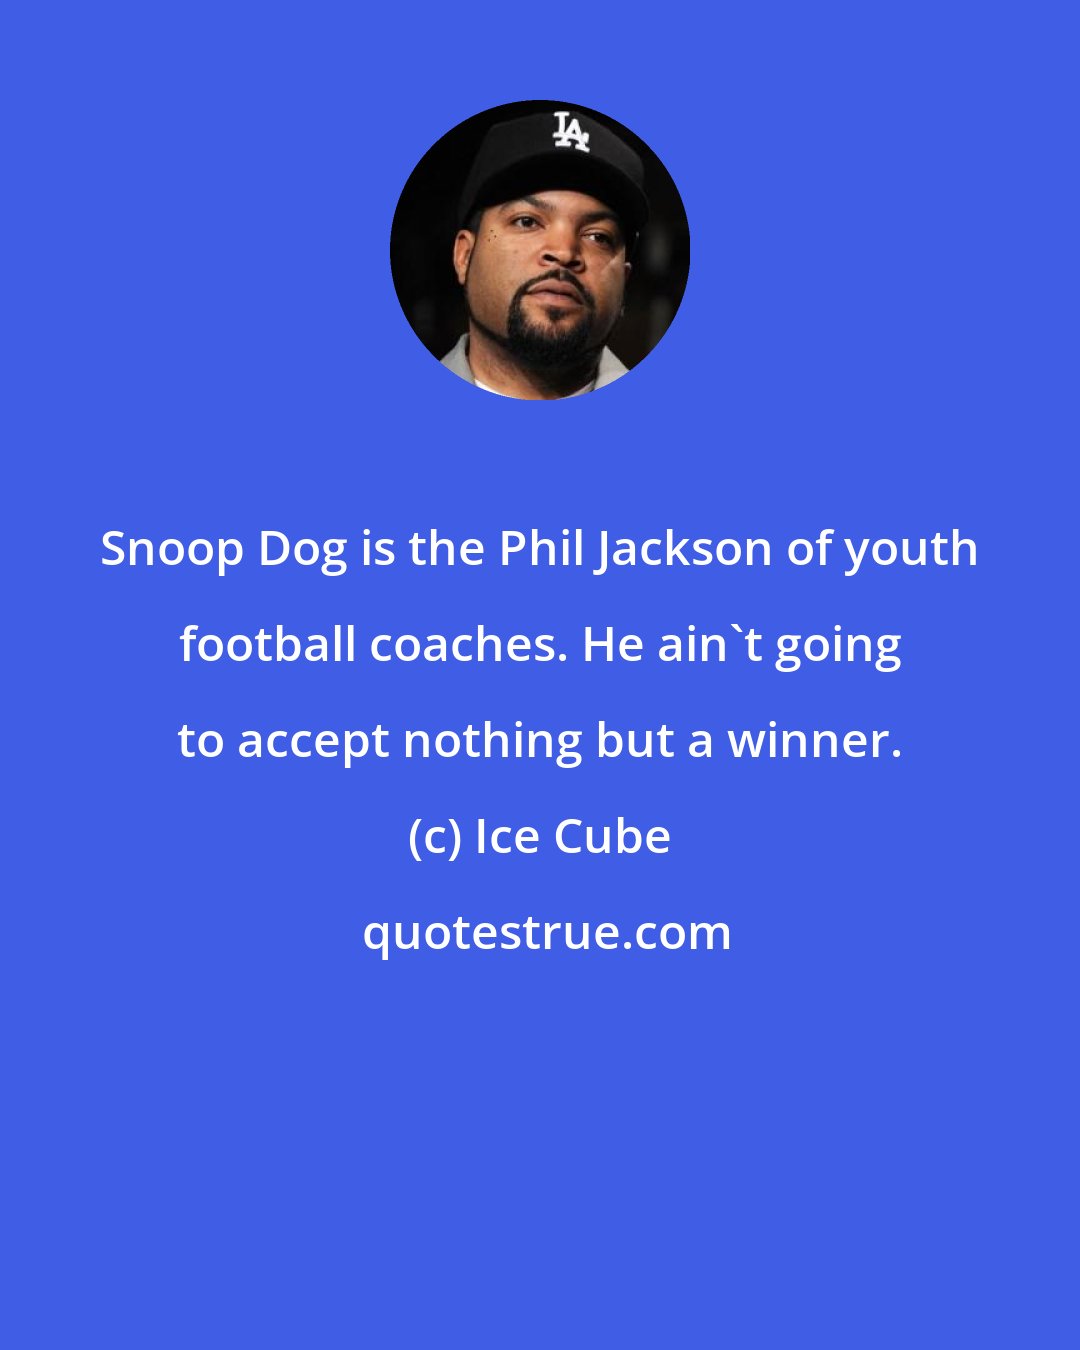 Ice Cube: Snoop Dog is the Phil Jackson of youth football coaches. He ain't going to accept nothing but a winner.